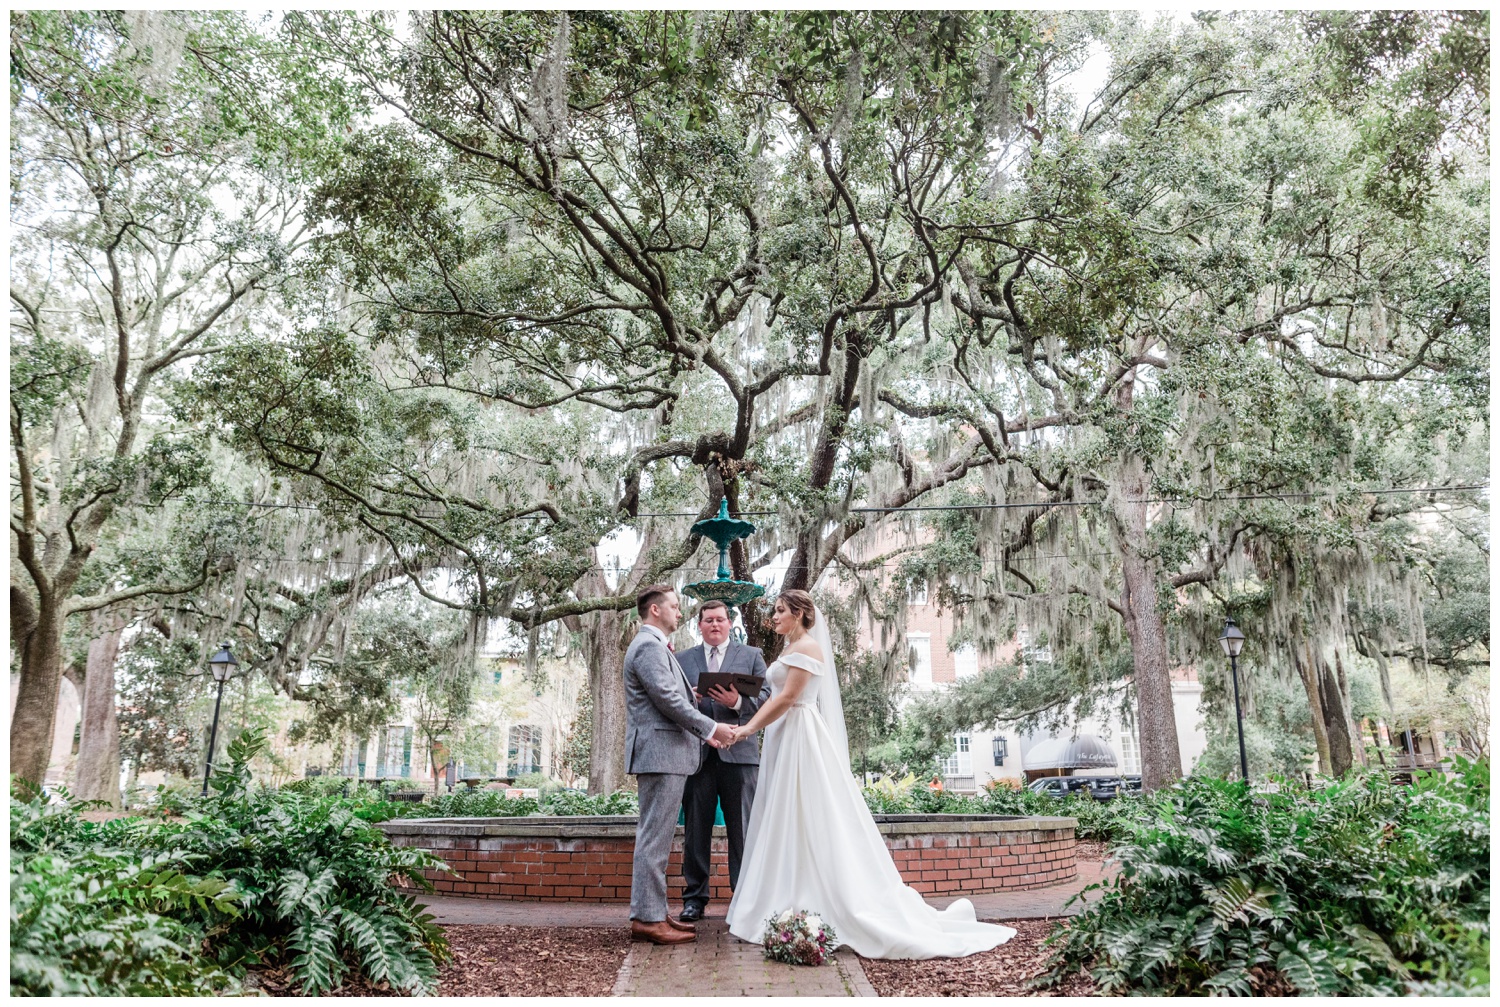 Ceremony under the oaks - The Savannah Elopement Package